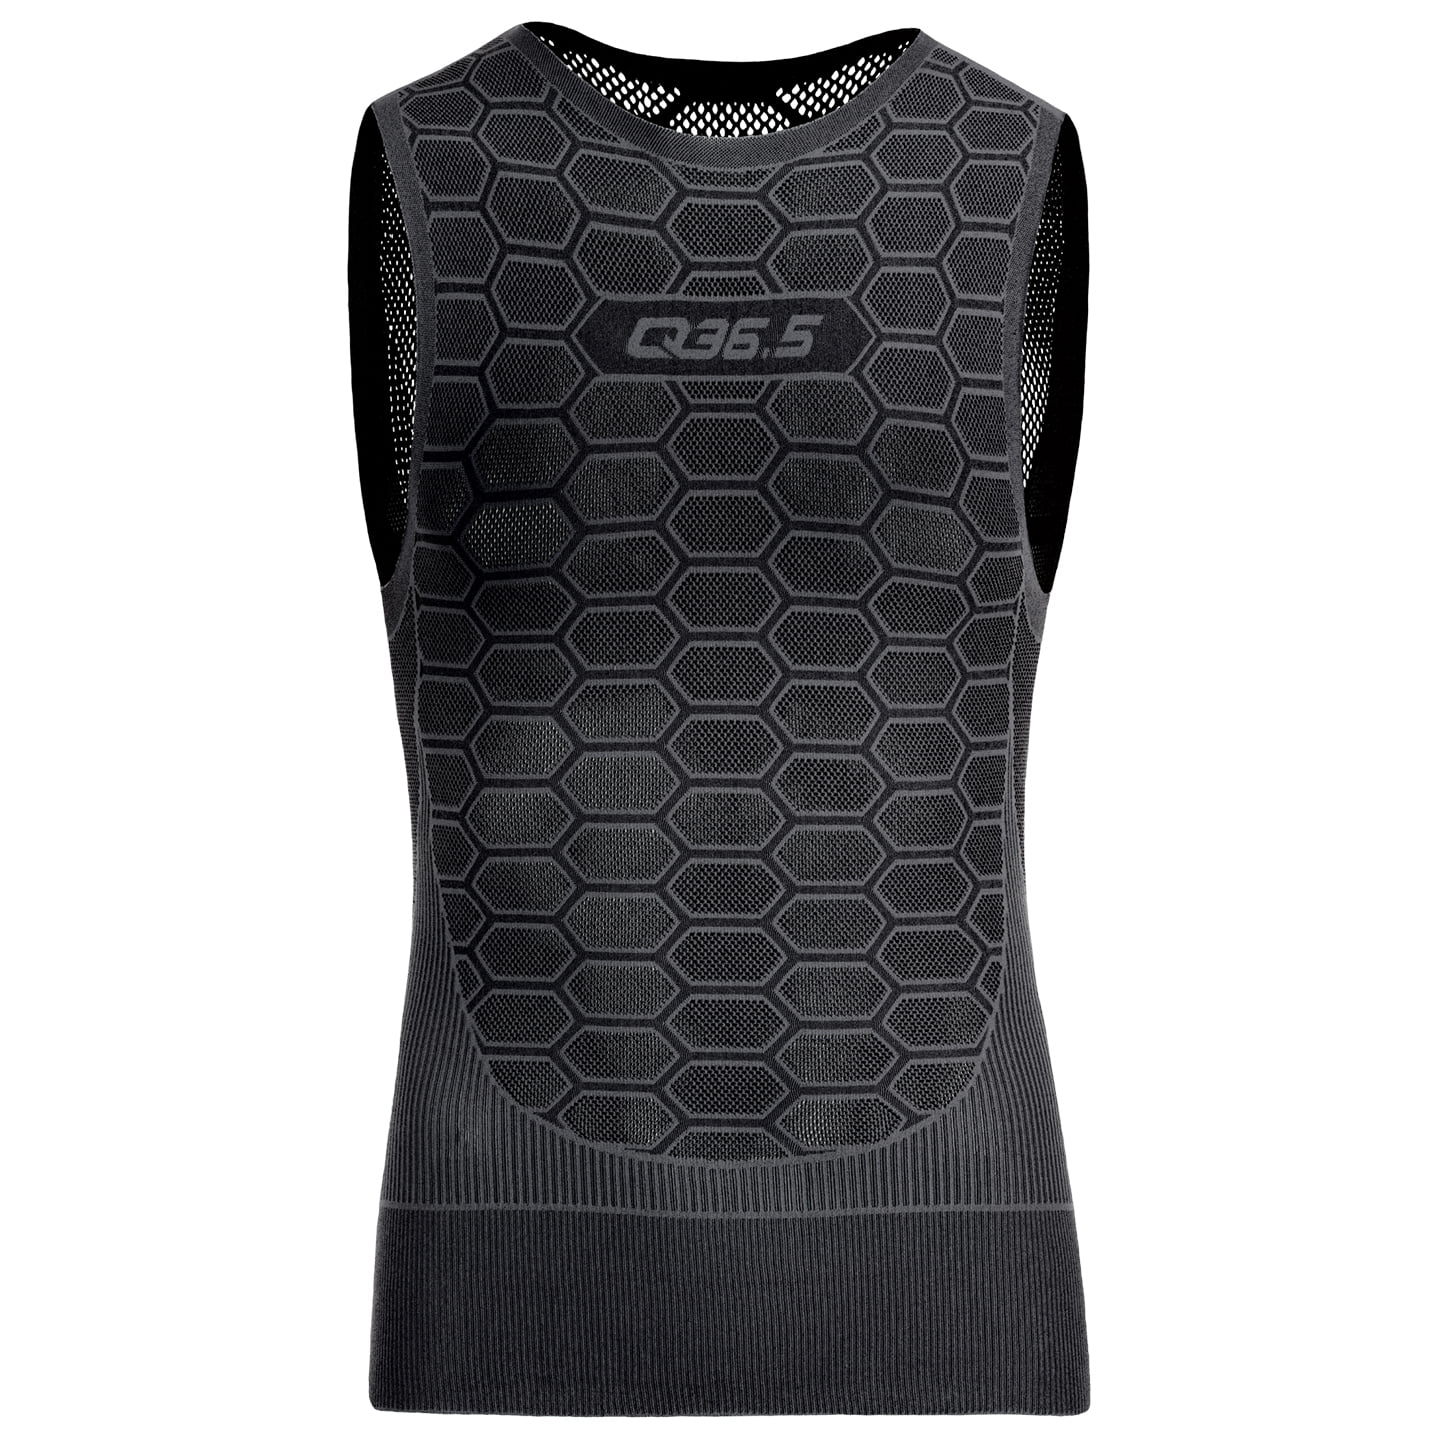 Q36.5 Sleeveless Cycling Layer 1 Base Layer, for men, size S-M